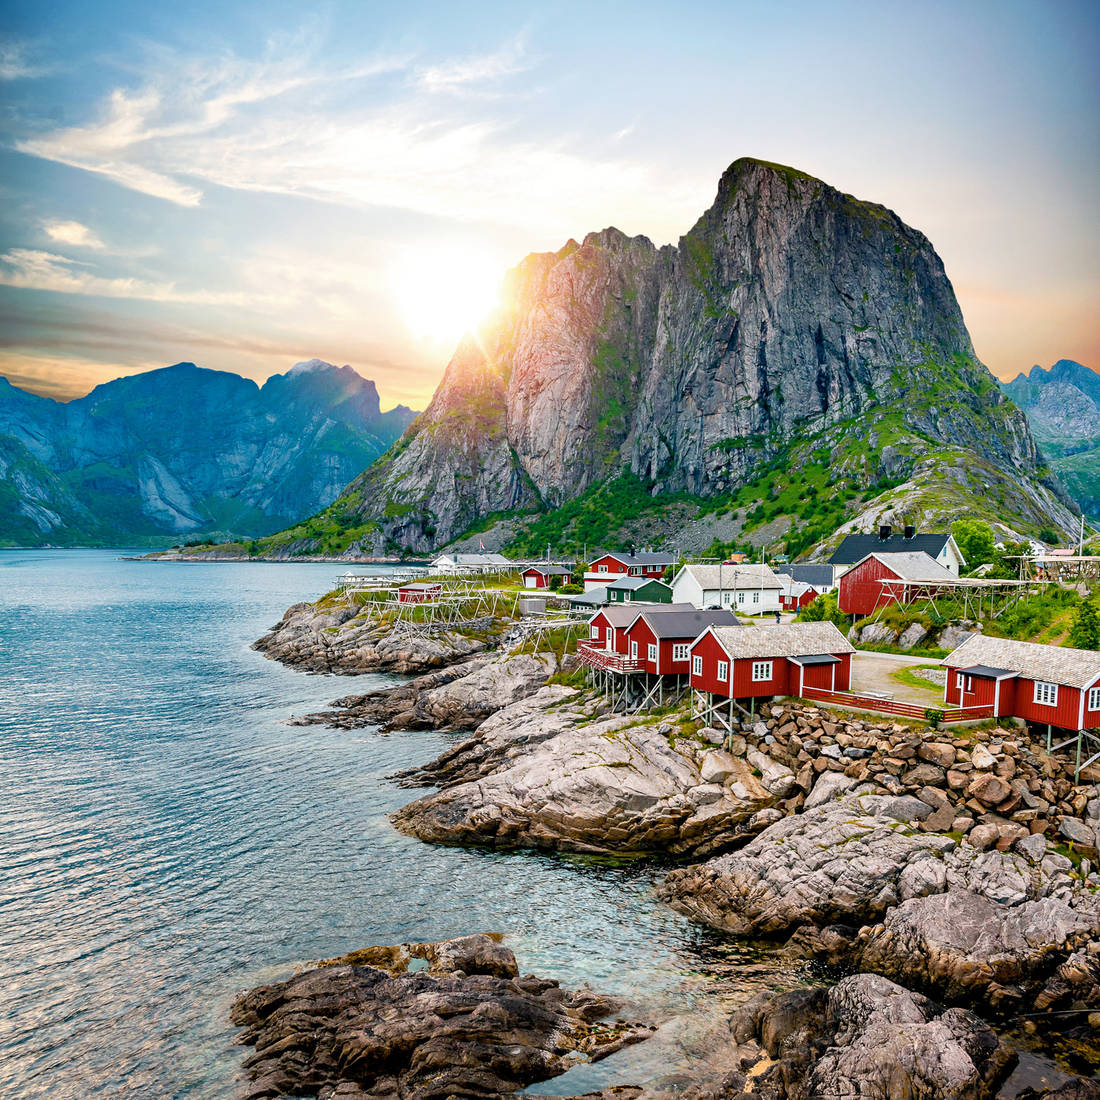 Norway , view of Lofoten Islands in Norway with sunset scenic